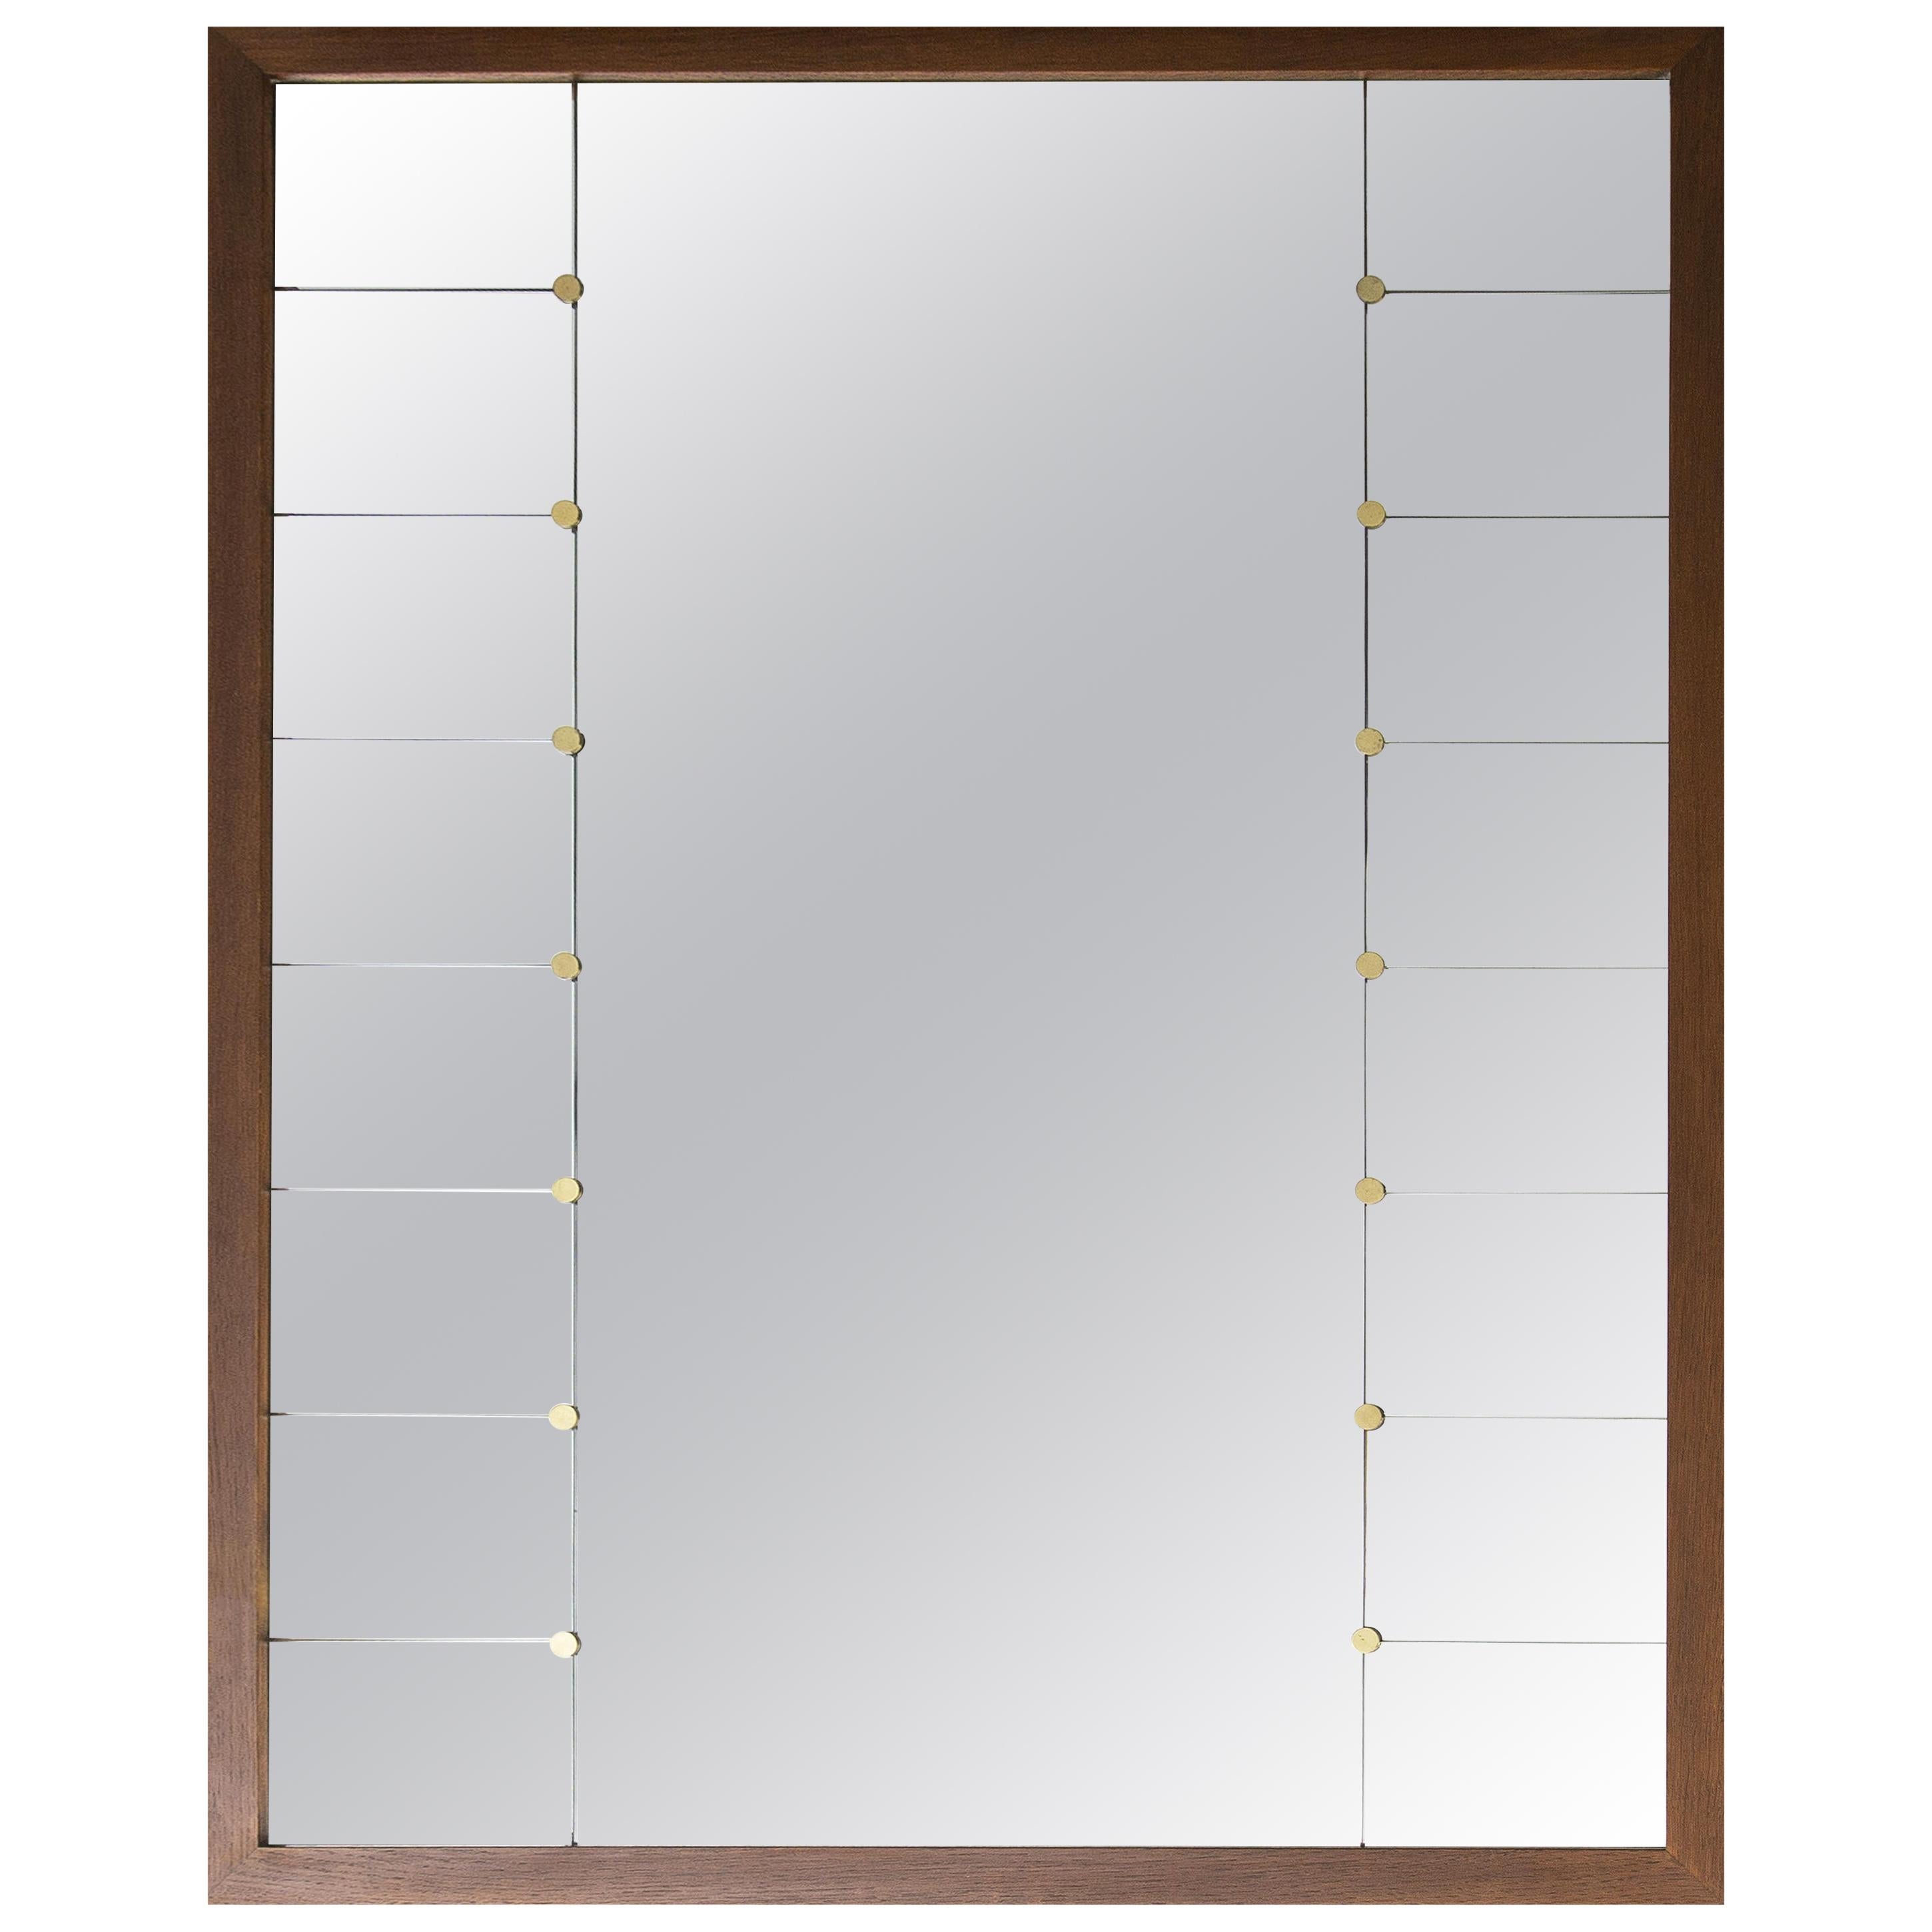 Large Midcentury Oak and Brass Mirror by Glas & Tra